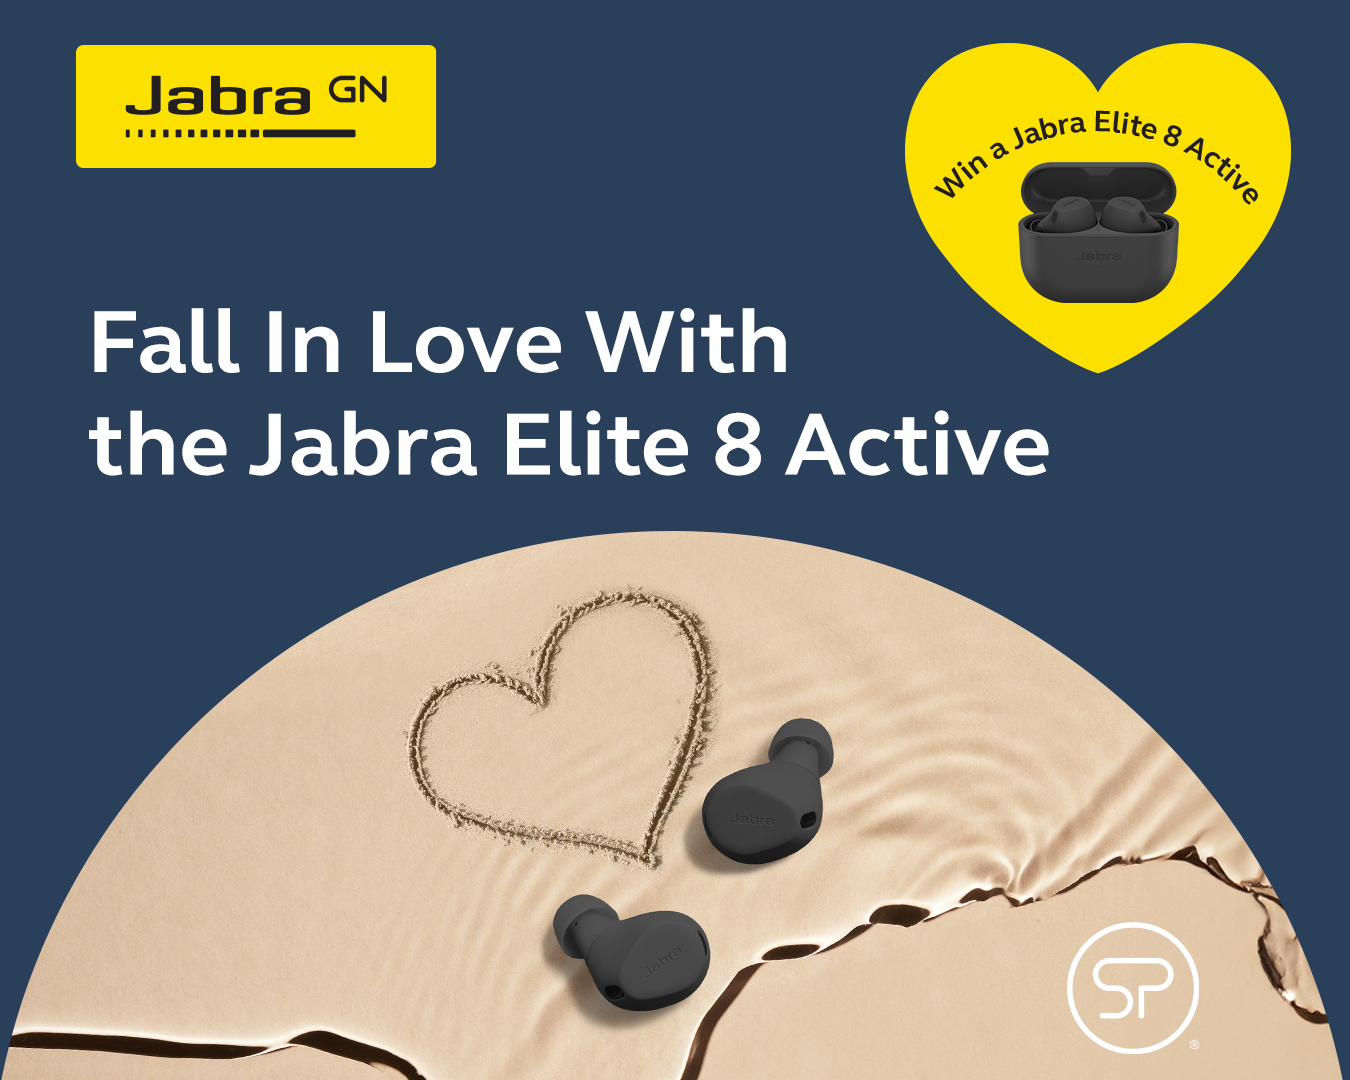 Fall in Love with Jabra Elite 8 Active